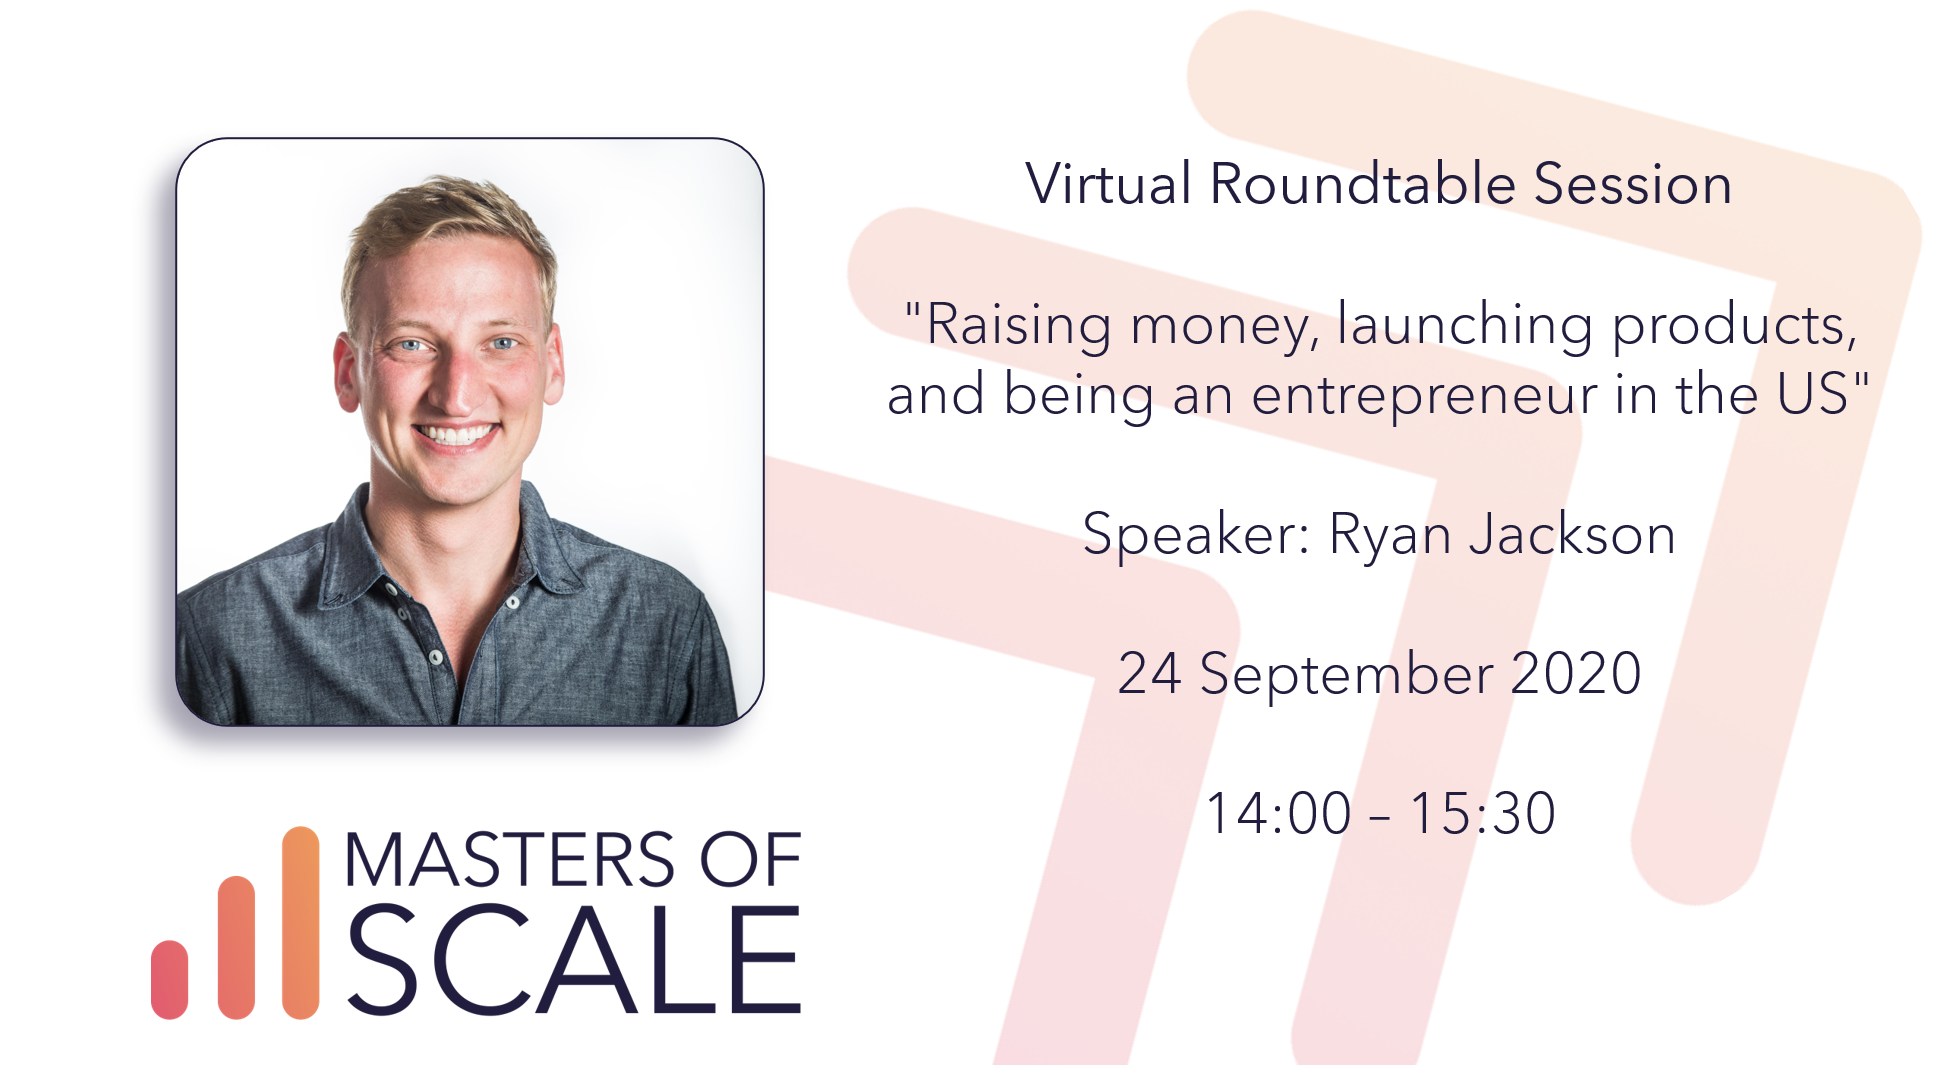 Roundtable Session: Raising money, launching products, and being an entrepreneur in the US